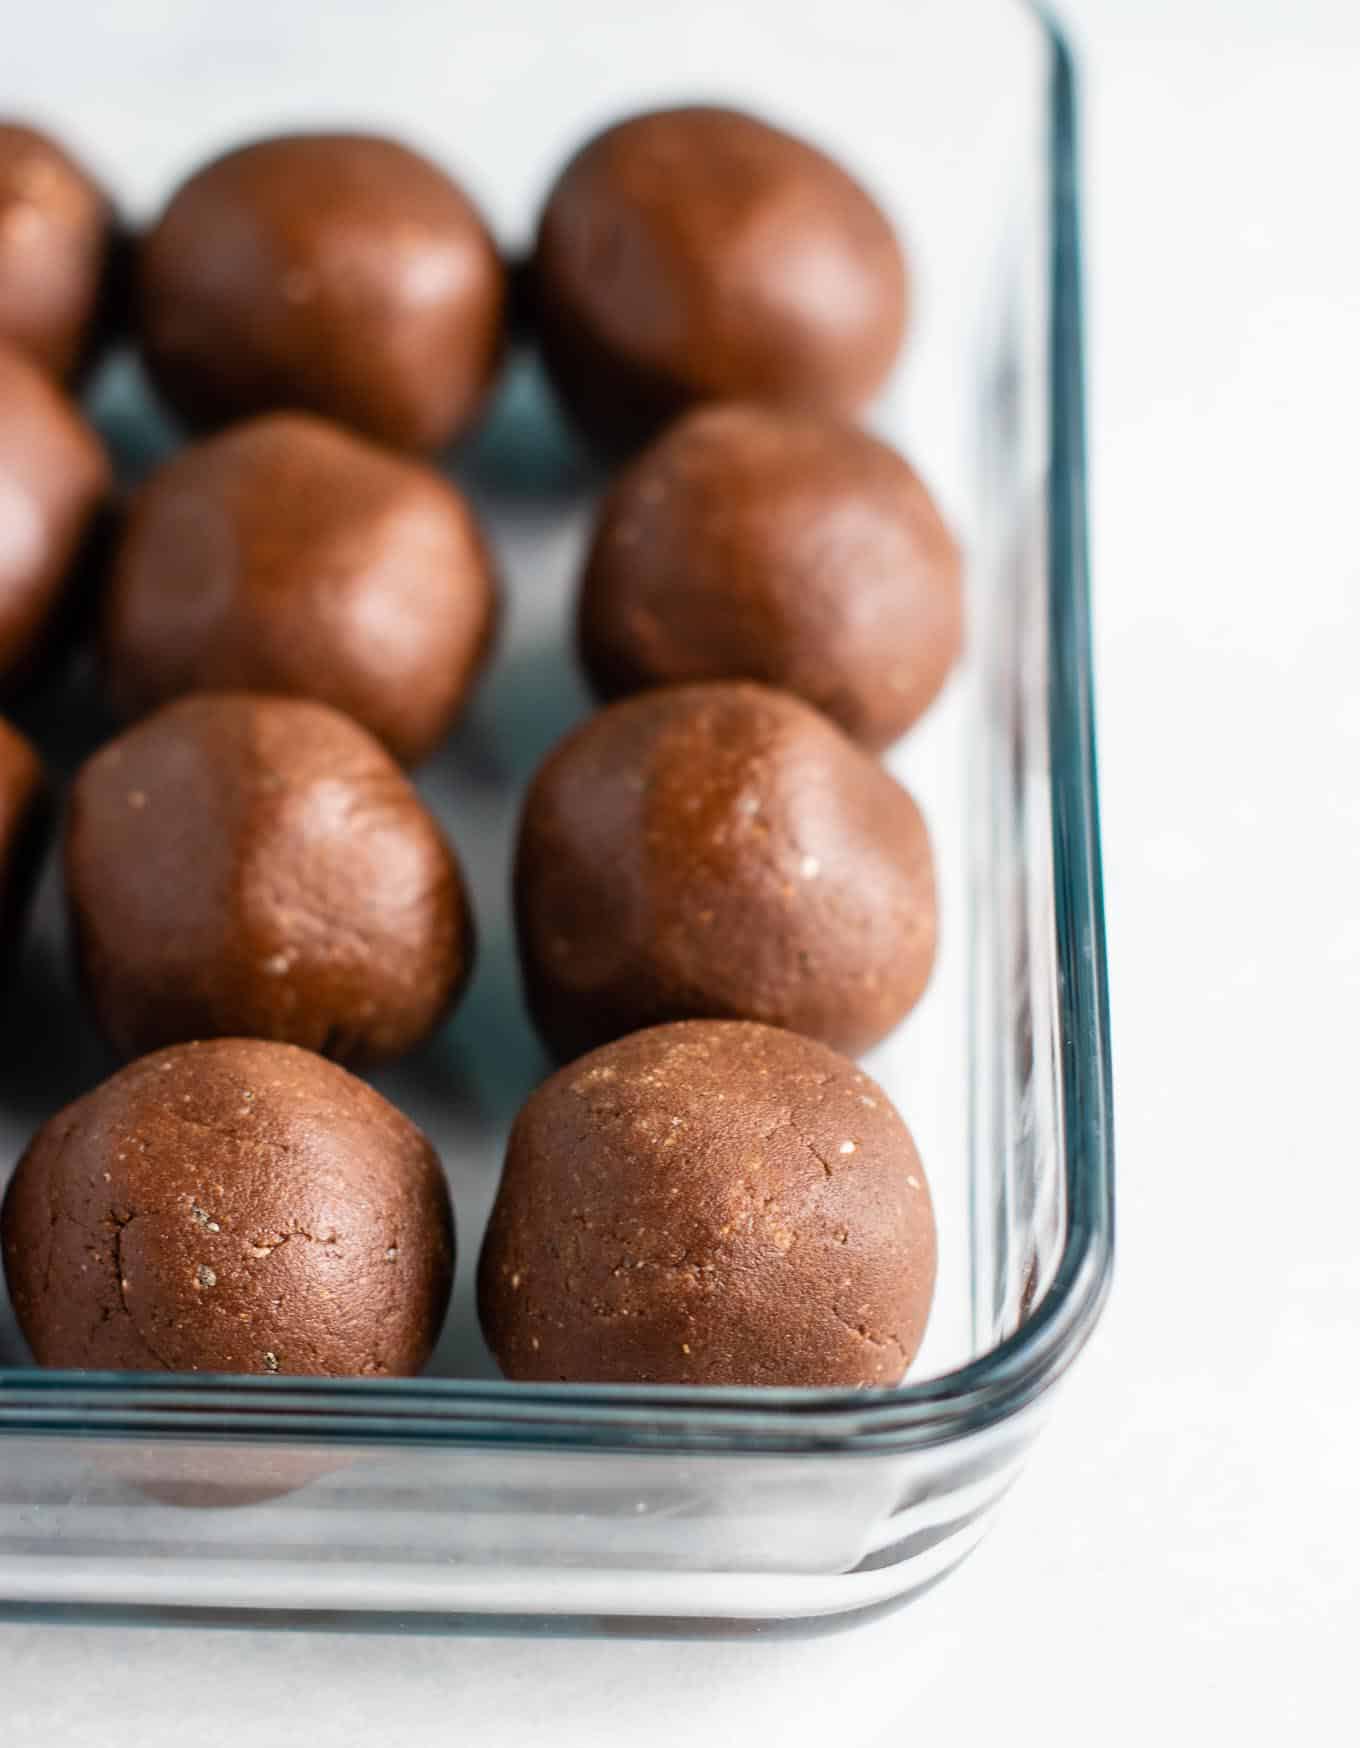 Chocolate protein balls (gluten free) Healthy dessert for when you're craving chocolate #proteinballs #chocolate #chocolateproteinballs #nobake #glutenfree